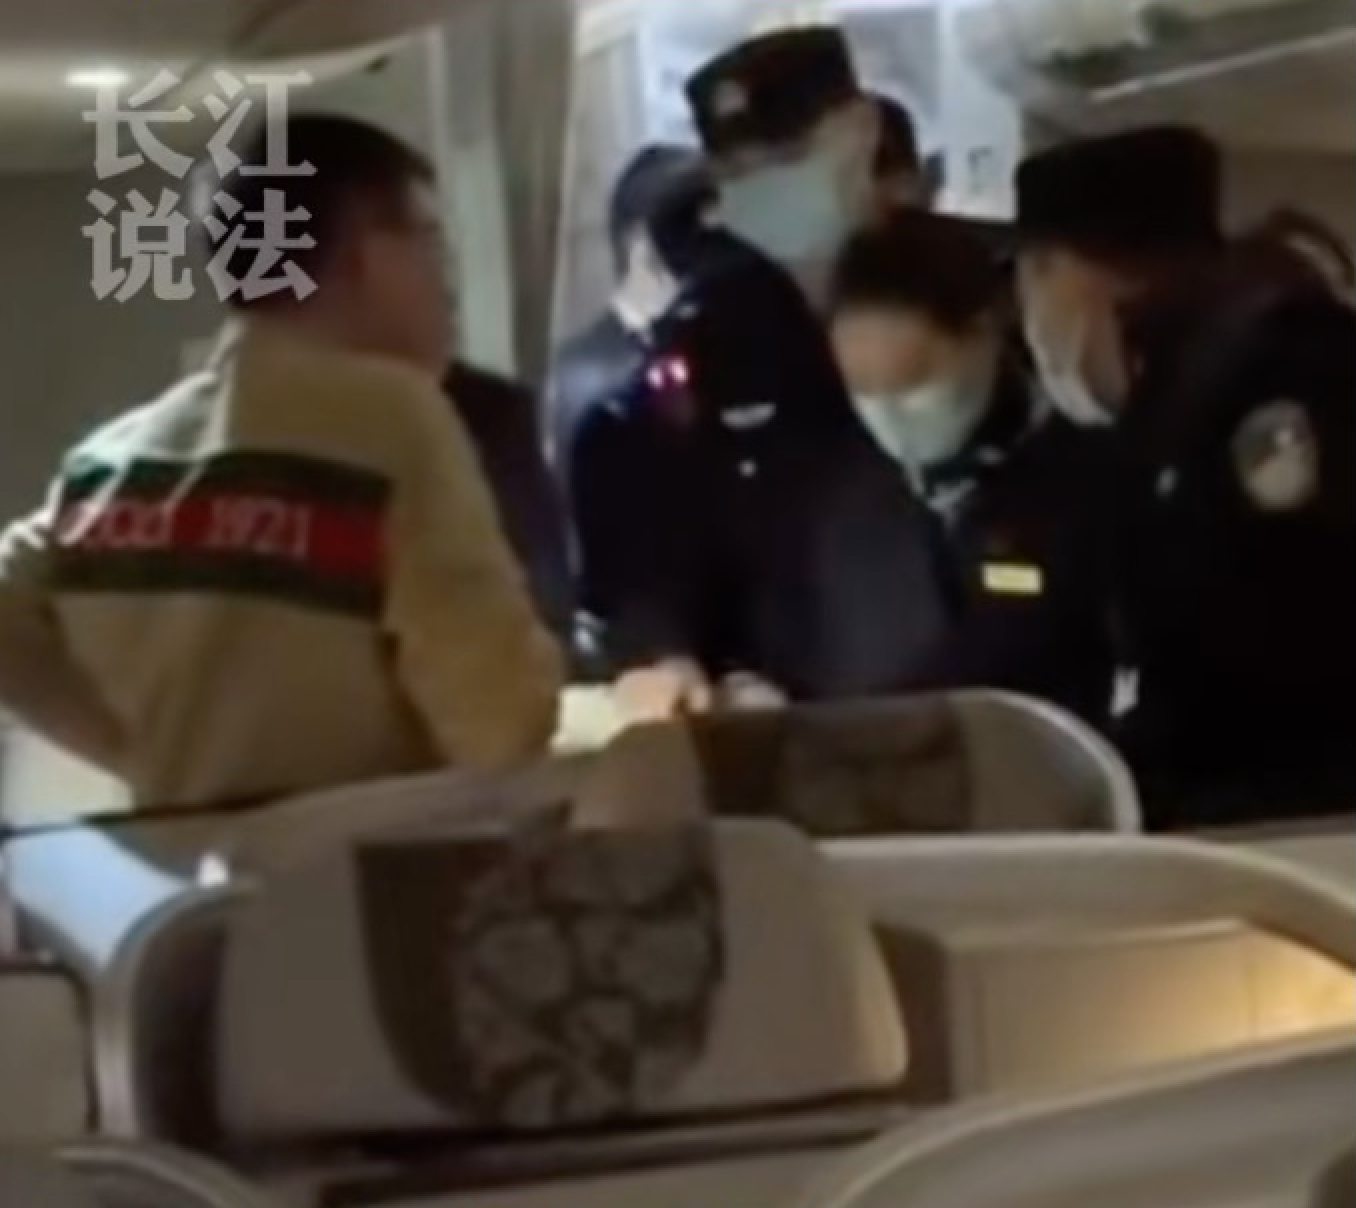 The angry passenger argues with cabin crew and police, incurring the wrath of his fellow fliers. Photo: Douyin